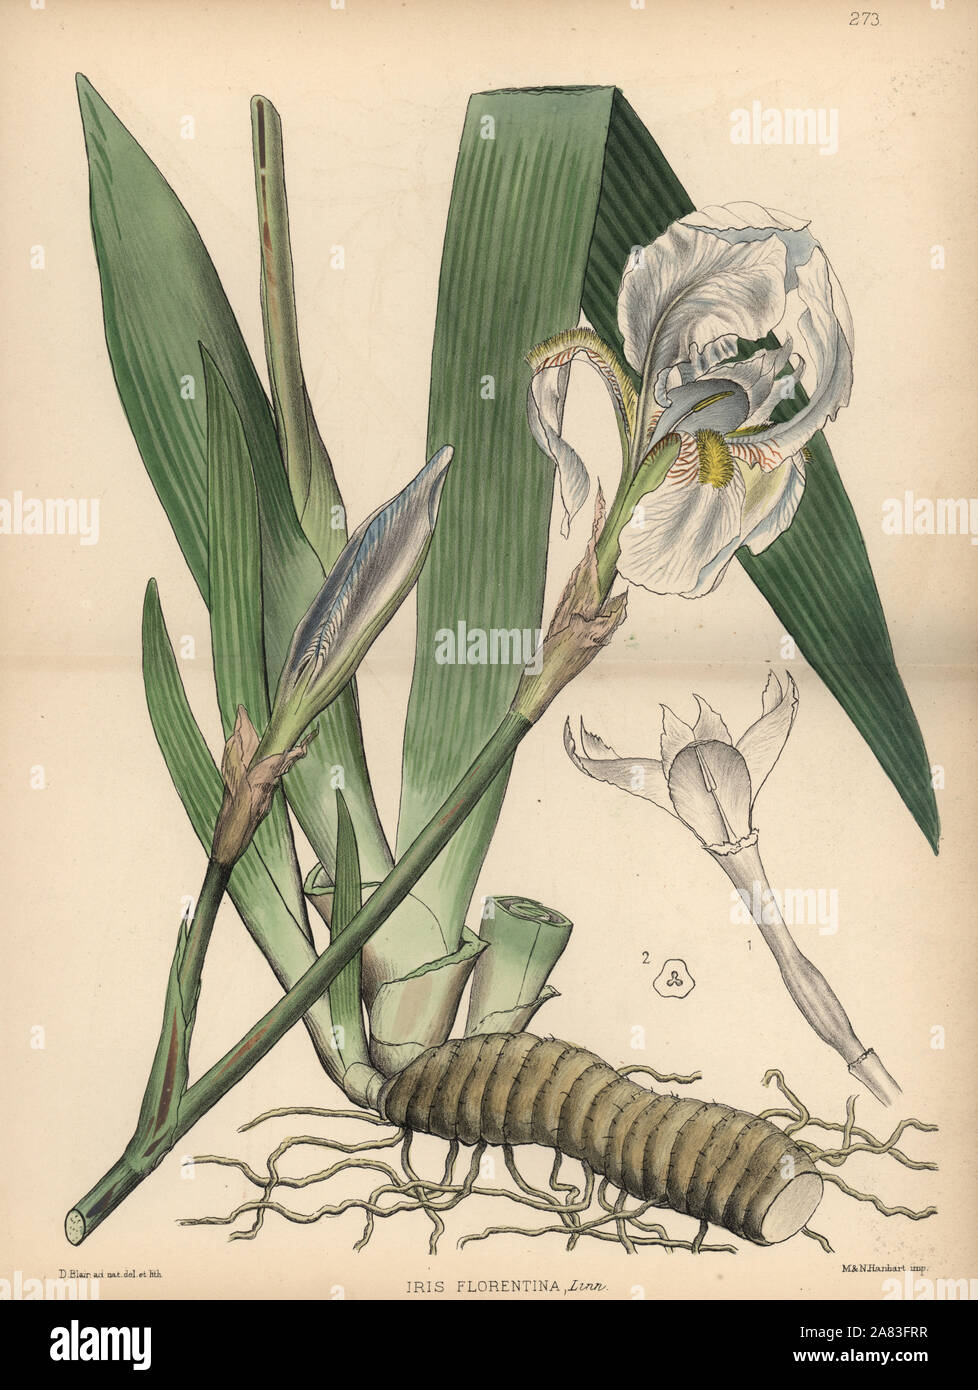 White flag, Iris germanica (Iris florentina). Handcoloured lithograph by Hanhart after a botanical illustration by David Blair from Robert Bentley and Henry Trimen's Medicinal Plants, London, 1880. Stock Photo